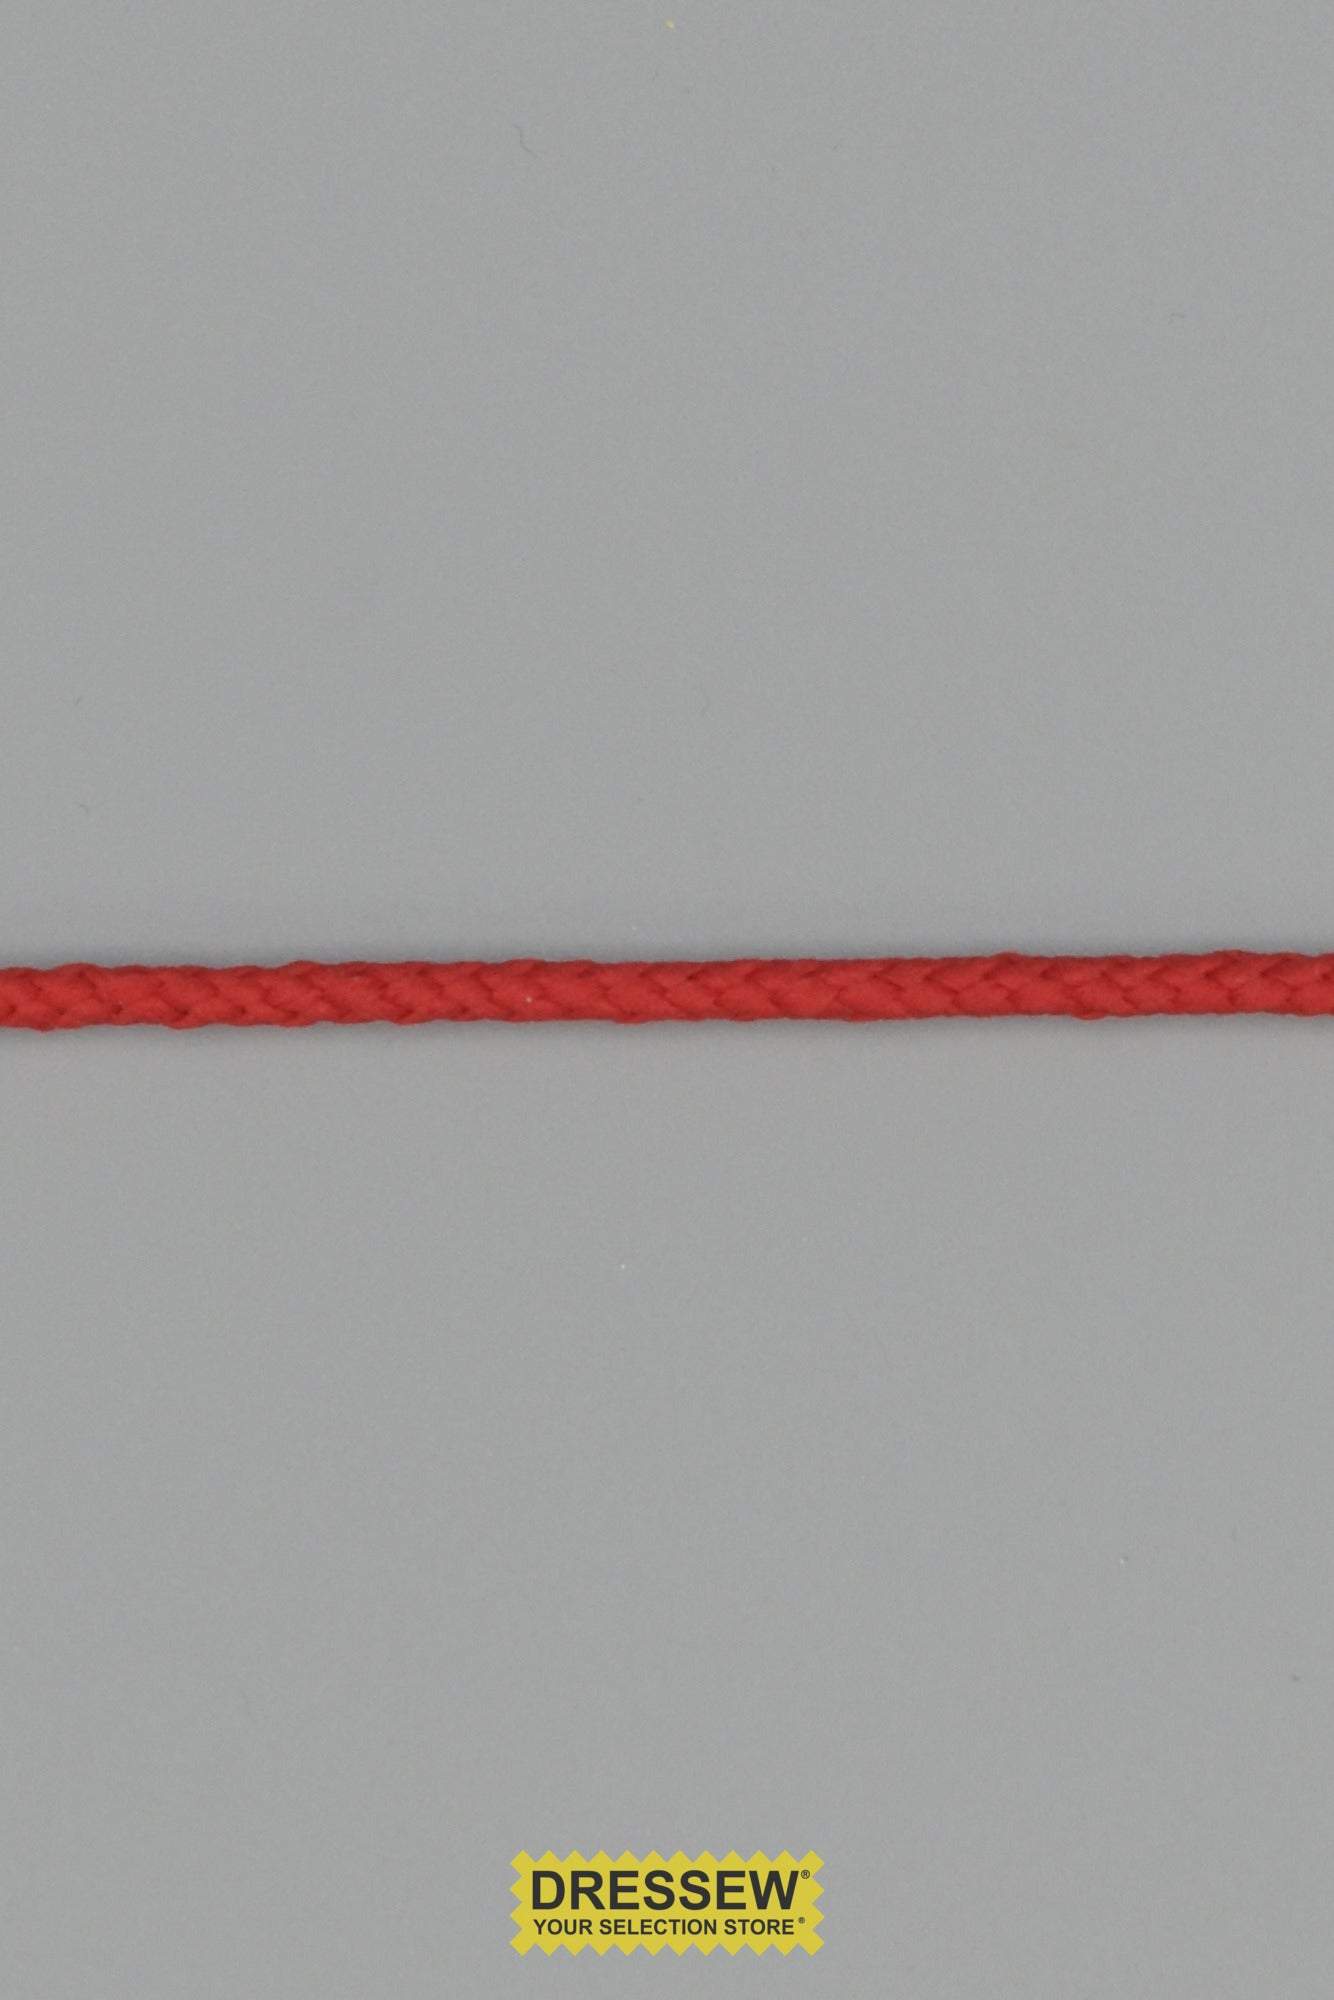 Braided Cord 3mm (1/8") Red